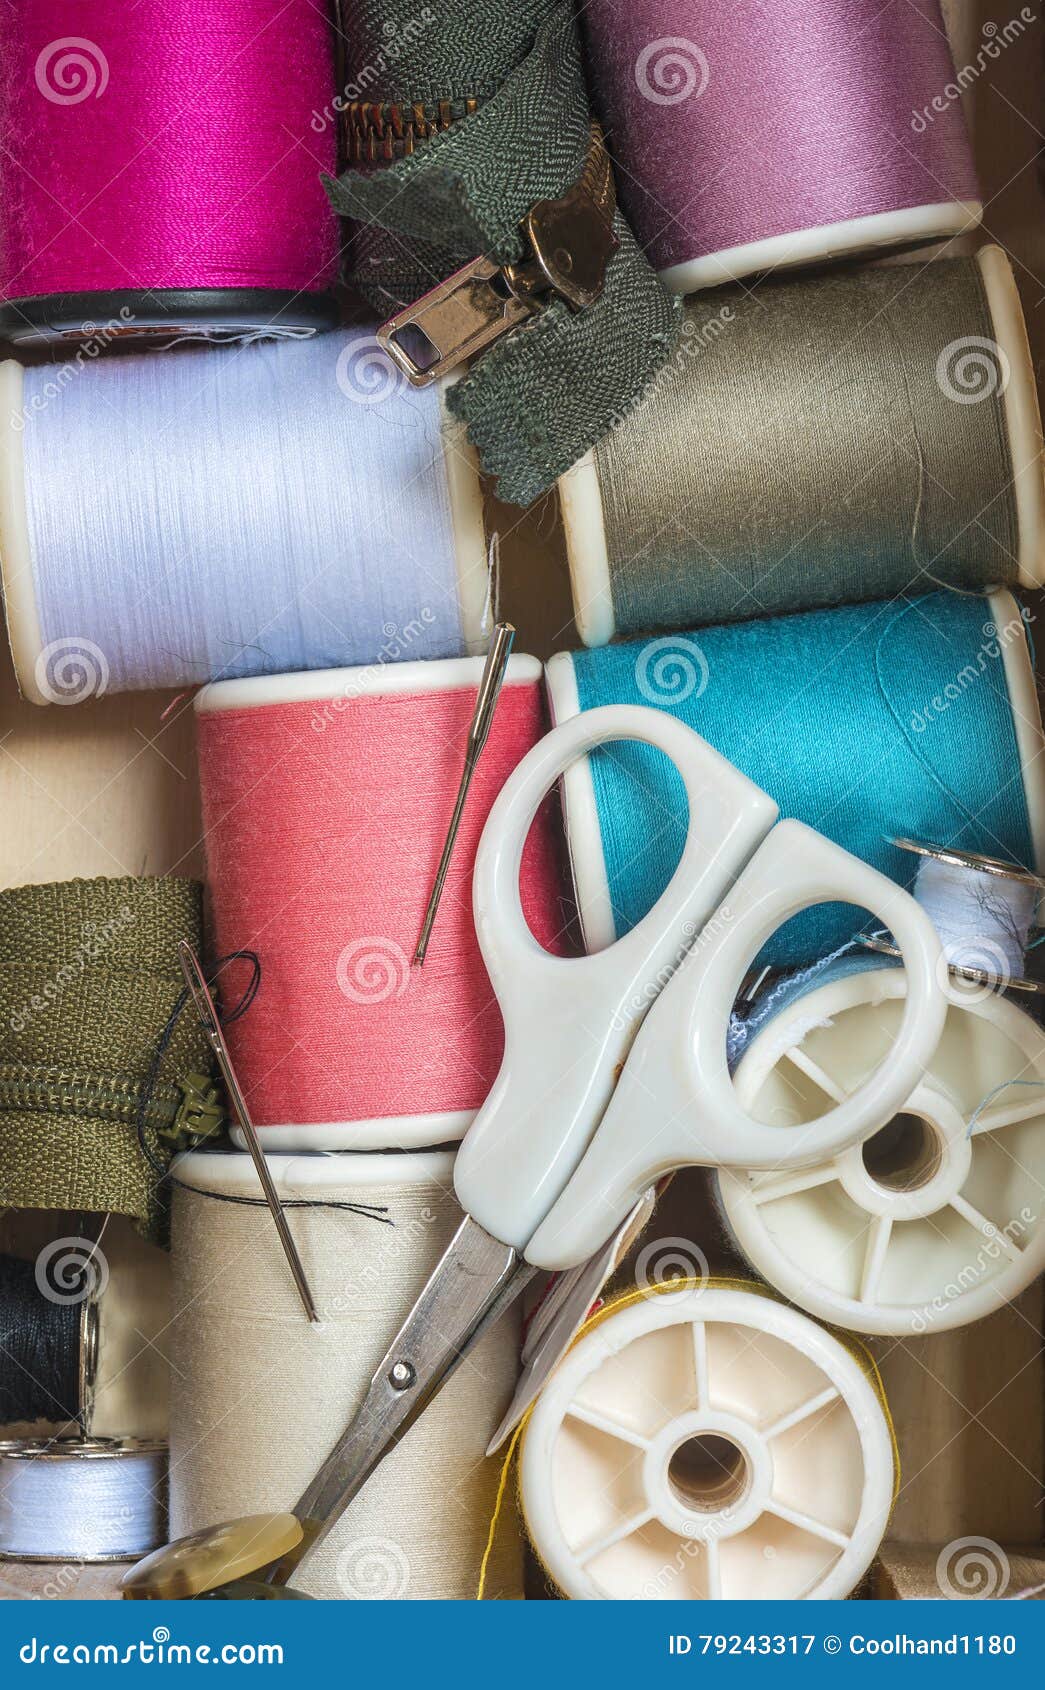 Sewing Supplies stock image. Image of supplies, textile - 79243317